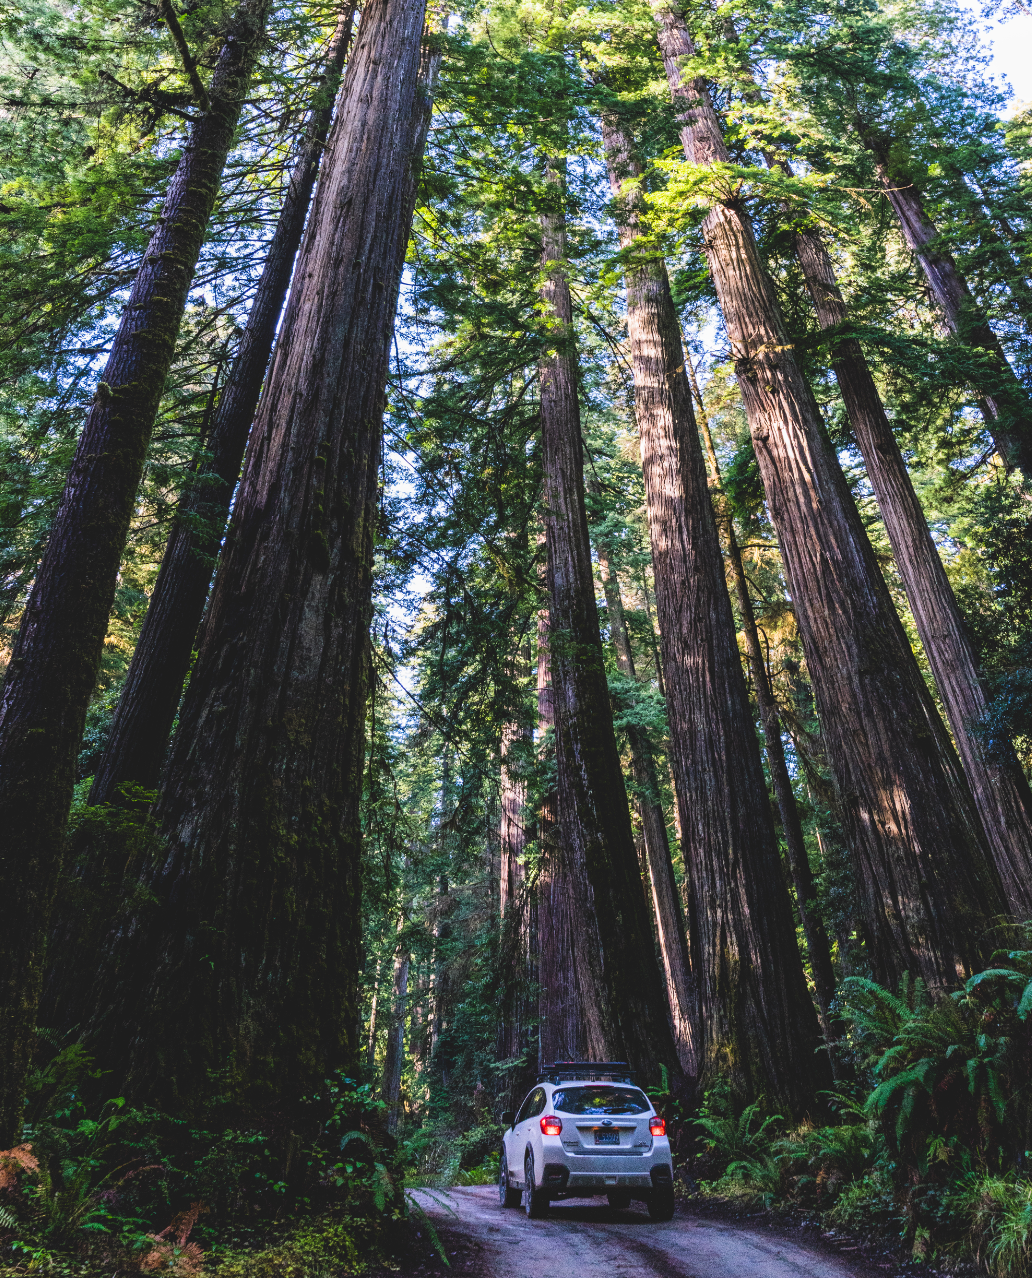 5 Stunning Trails to Check Out in Redwood National Park